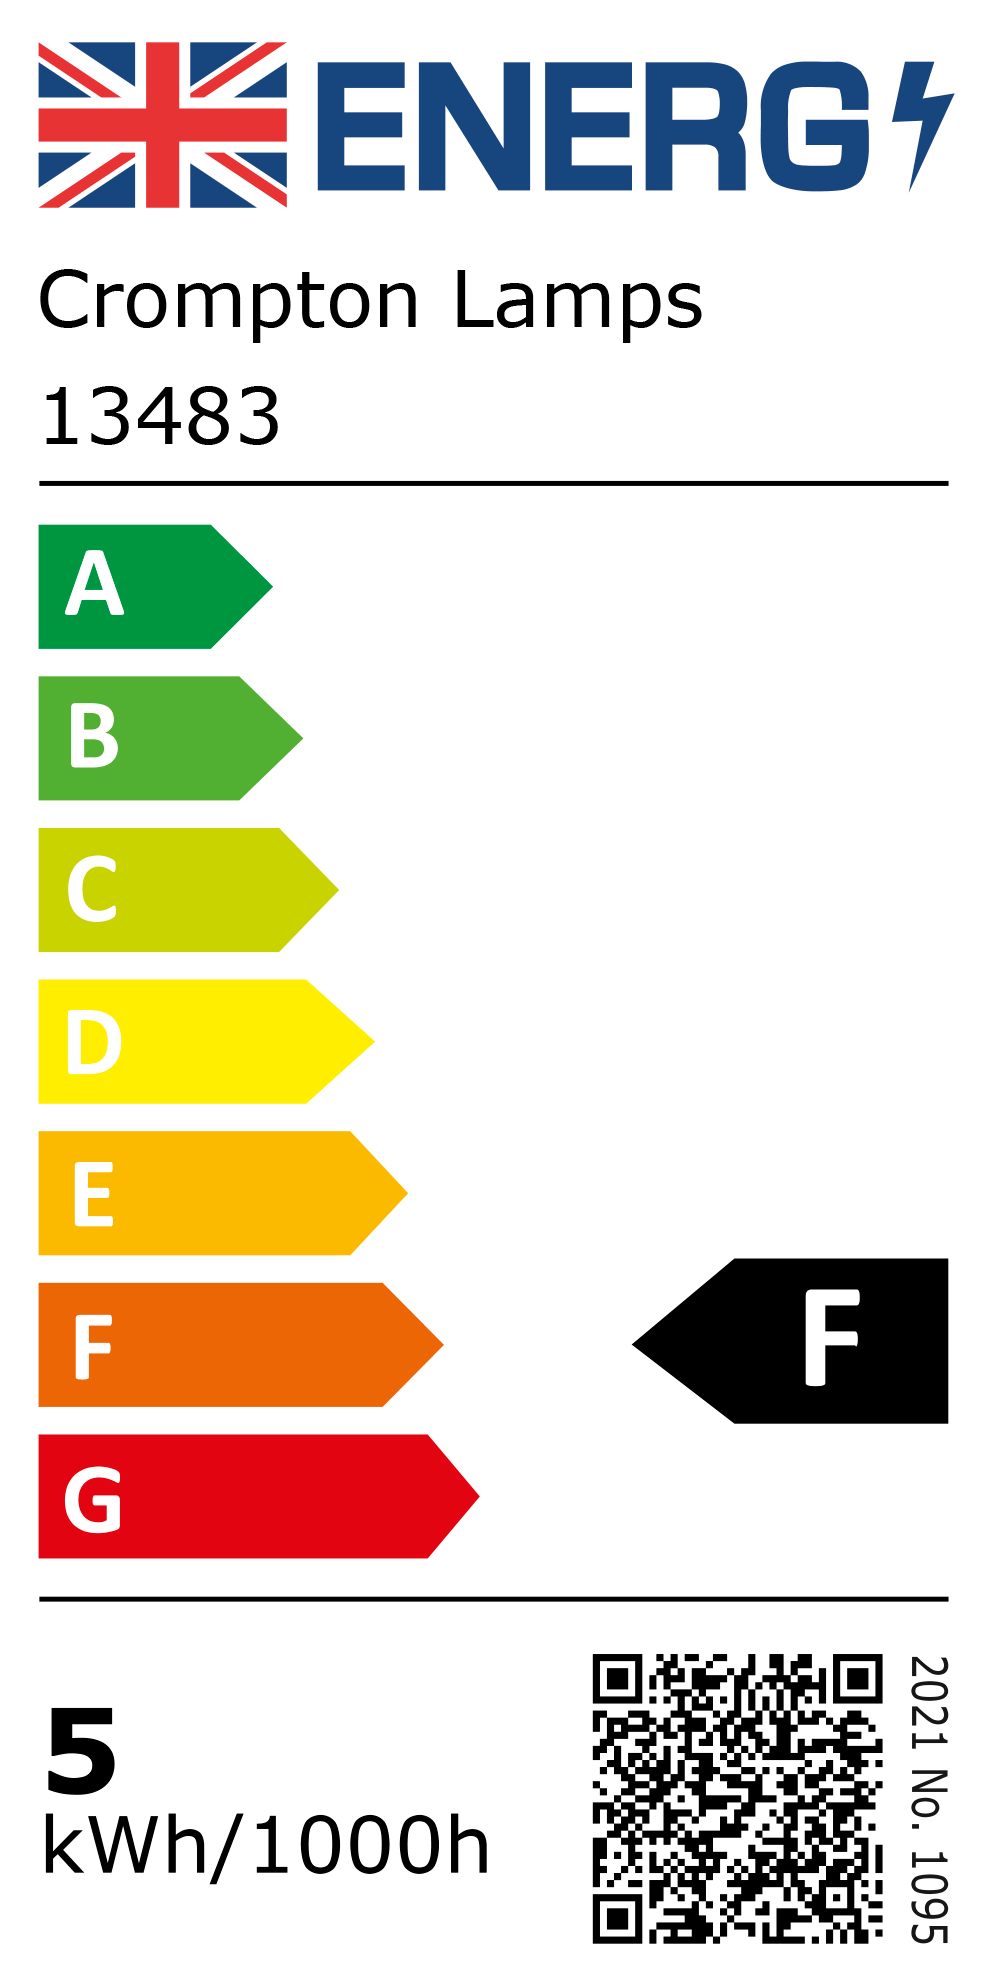 New 2021 Energy Rating Label: Stock Code 13483